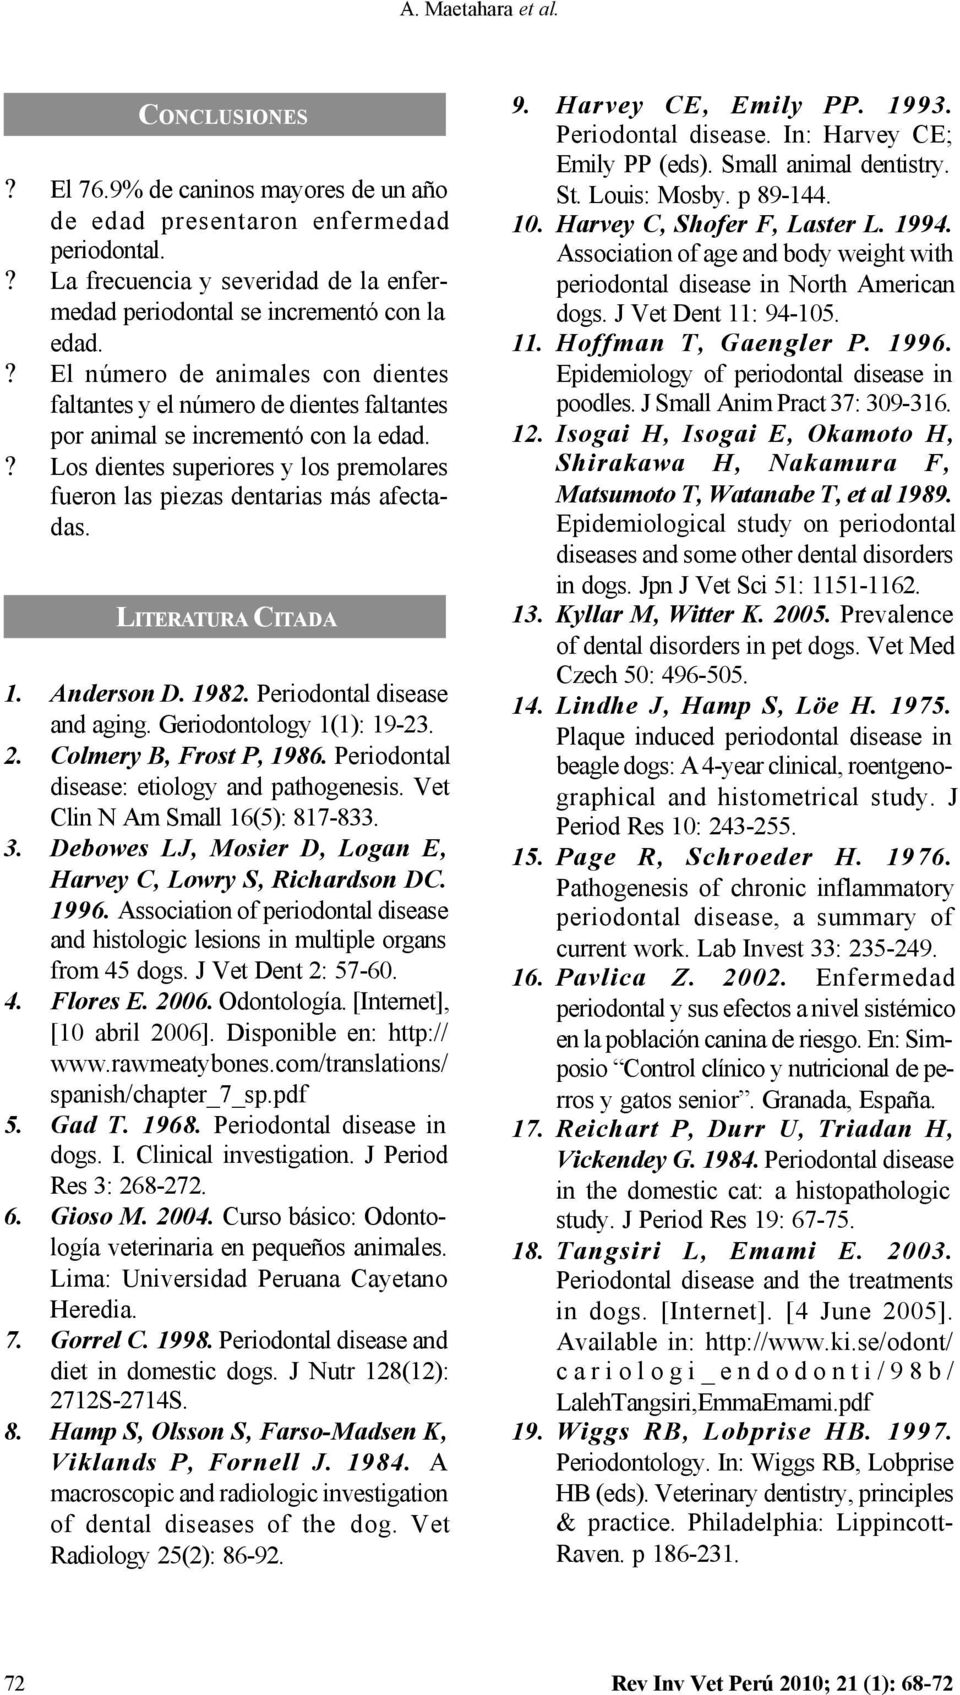 LITERATURA CITADA 1. Anderson D. 1982. Periodontal disease and aging. Geriodontology 1(1): 19-23. 2. Colmery B, Frost P, 1986. Periodontal disease: etiology and pathogenesis.